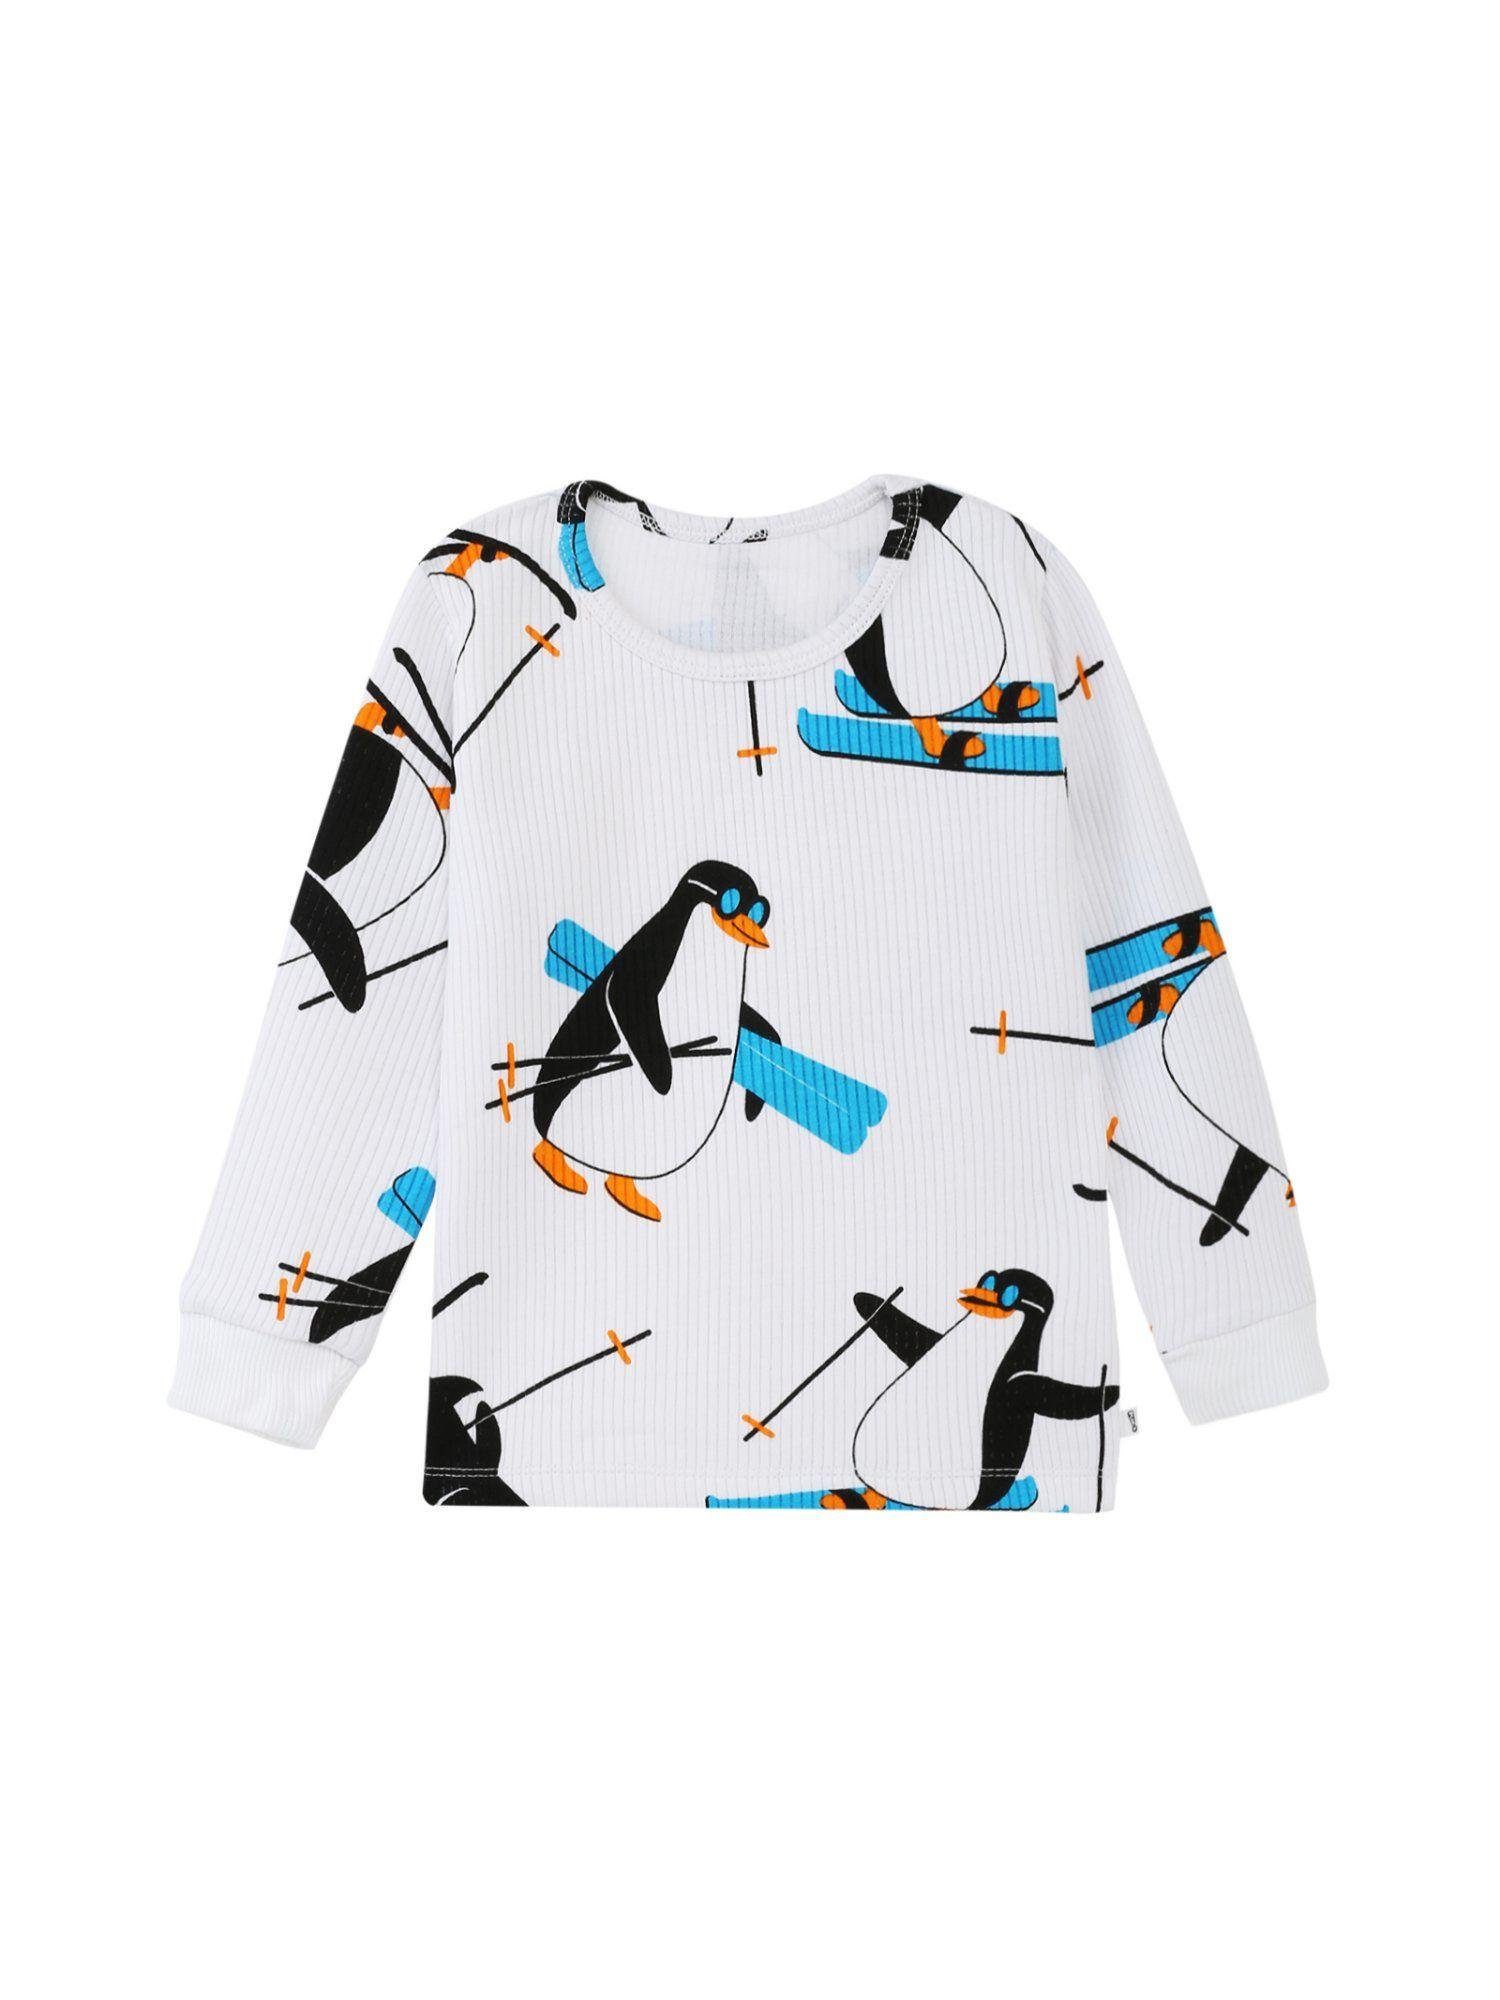 penguin party - full sleeve thermal top